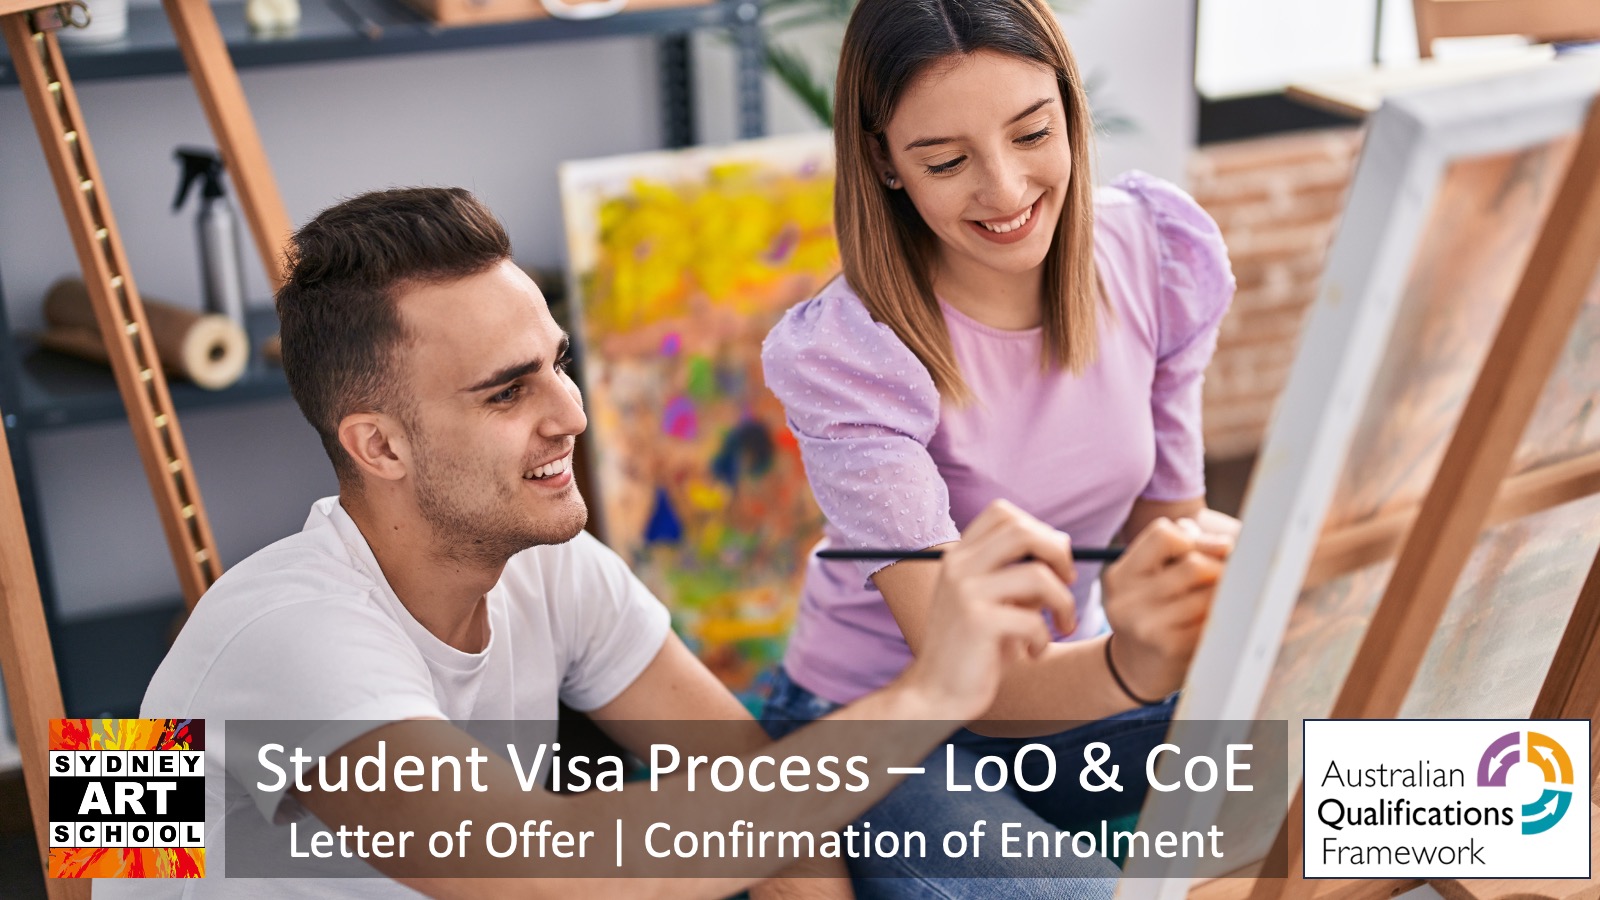 Applying for Your Student Visa - How to get a CoE and LoO